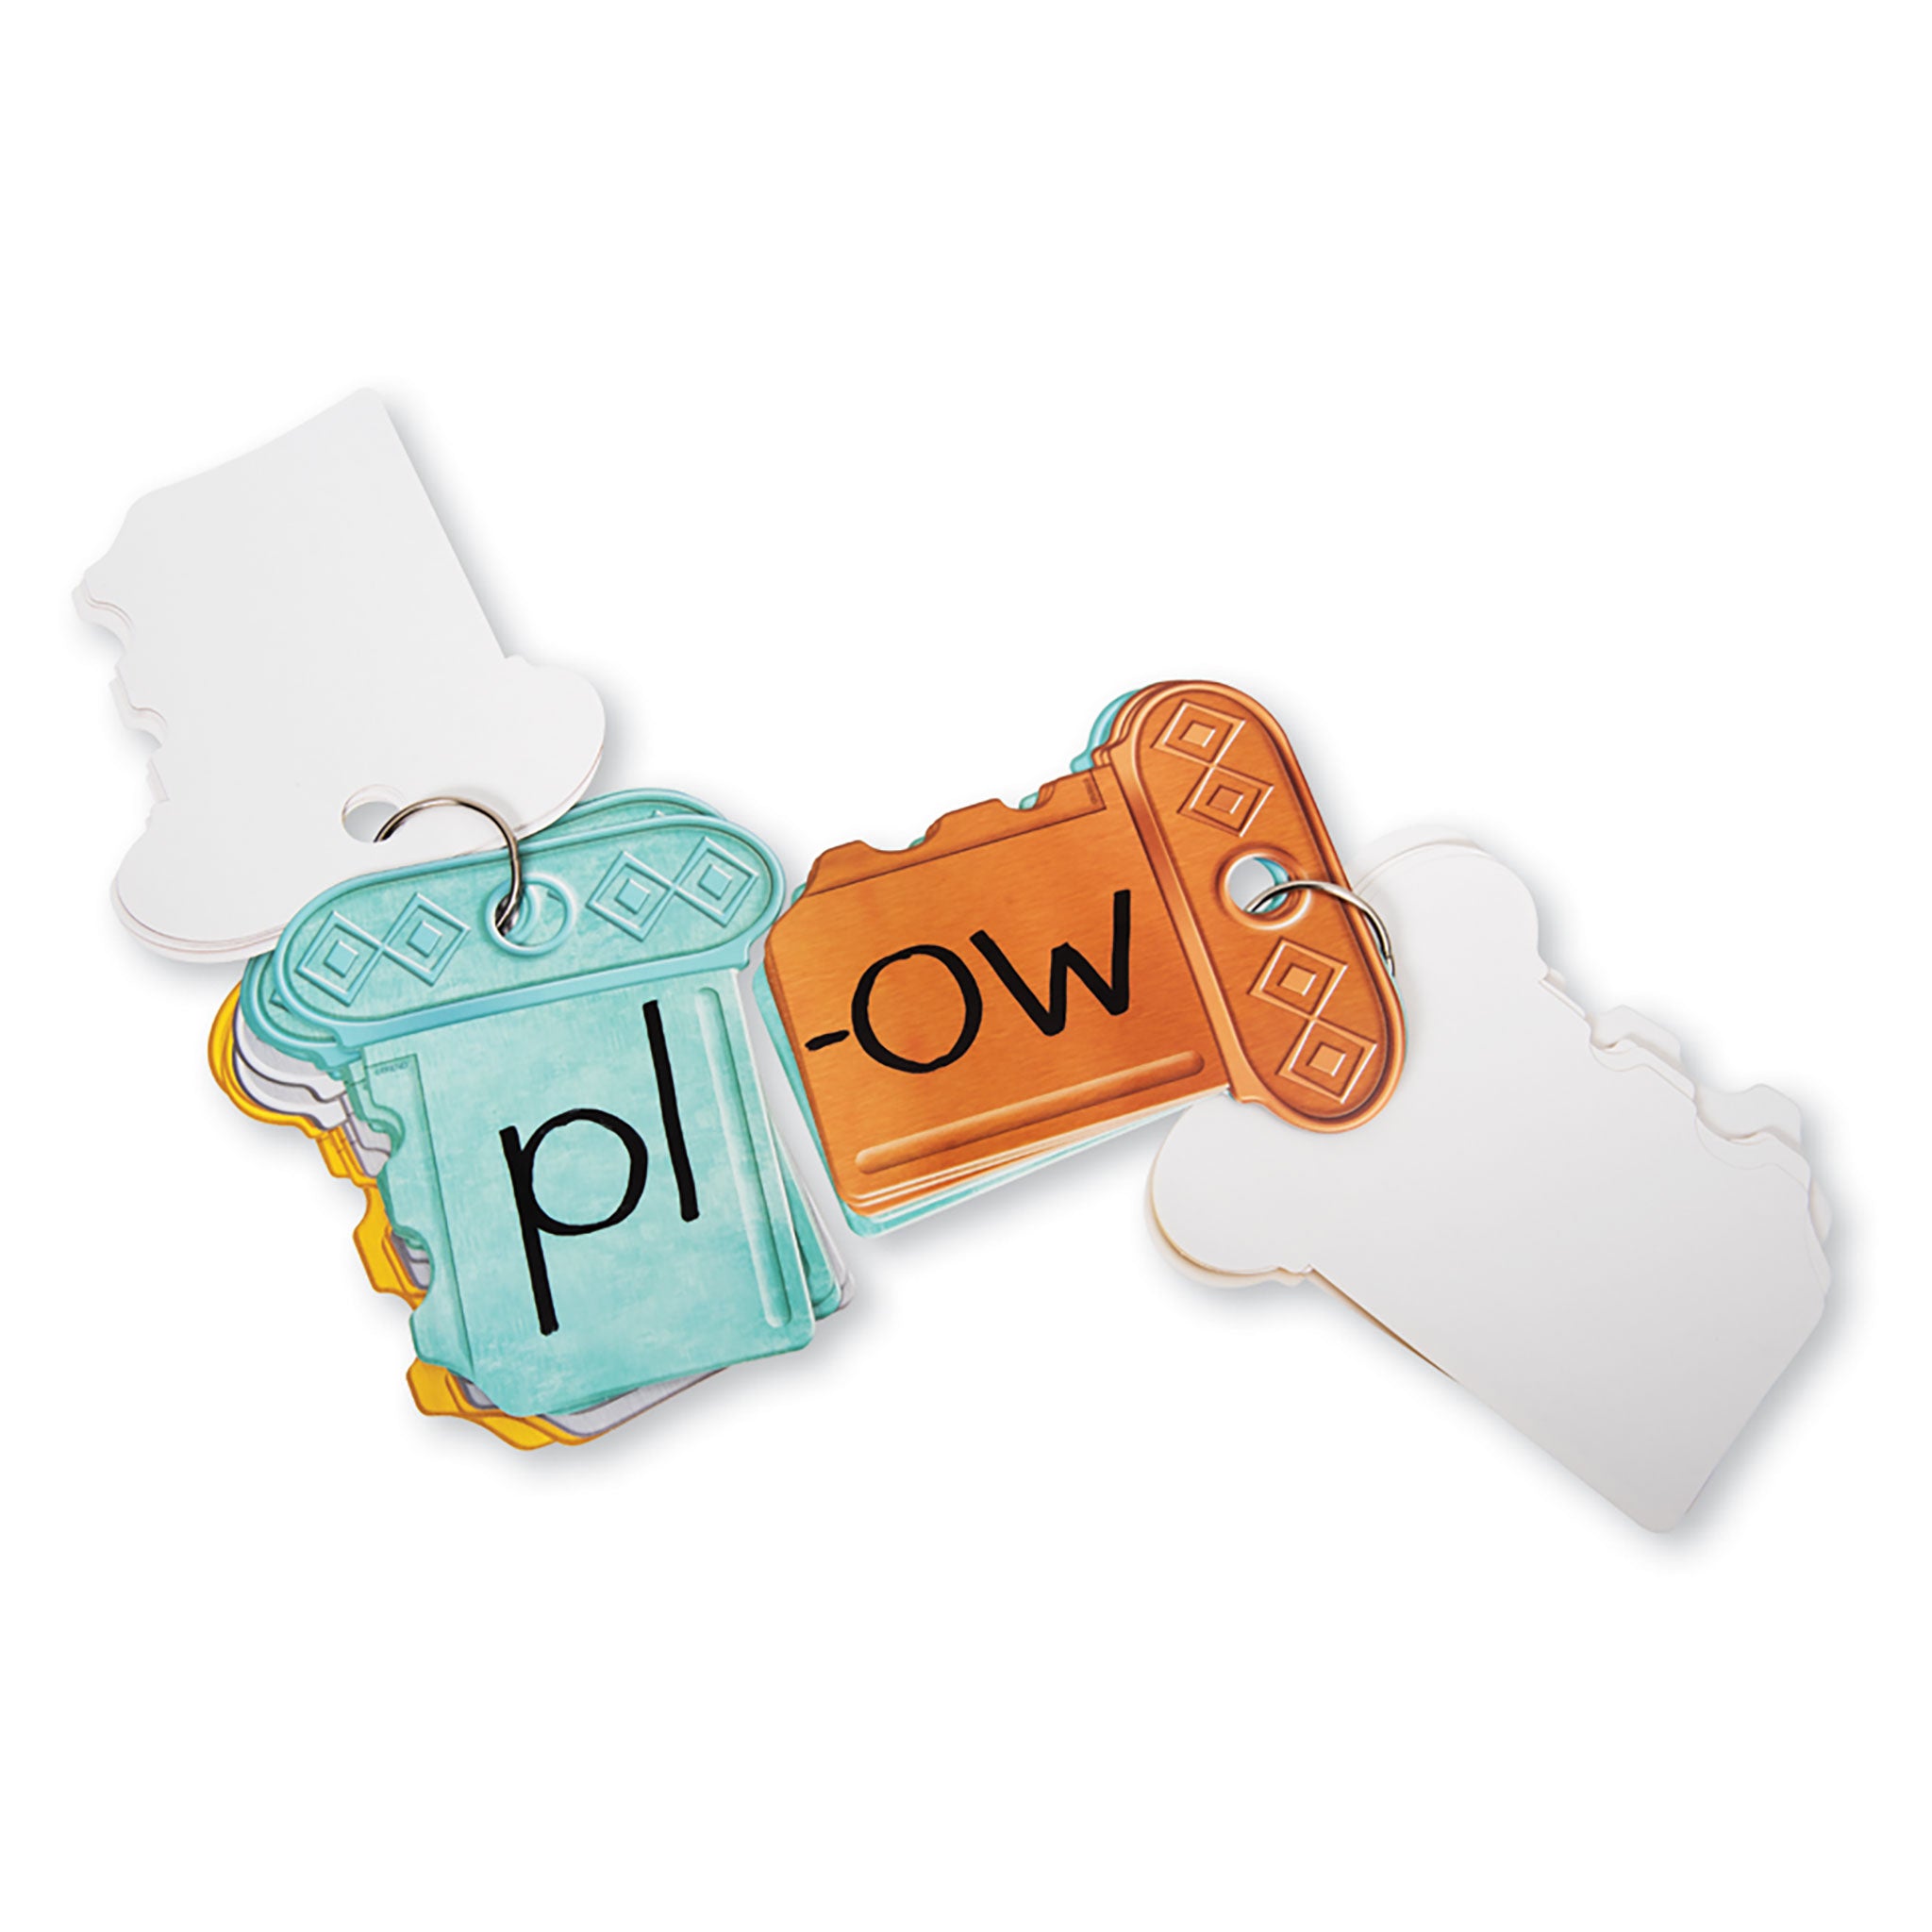 A1095 Key Words Key Ring Learning FUN Activity